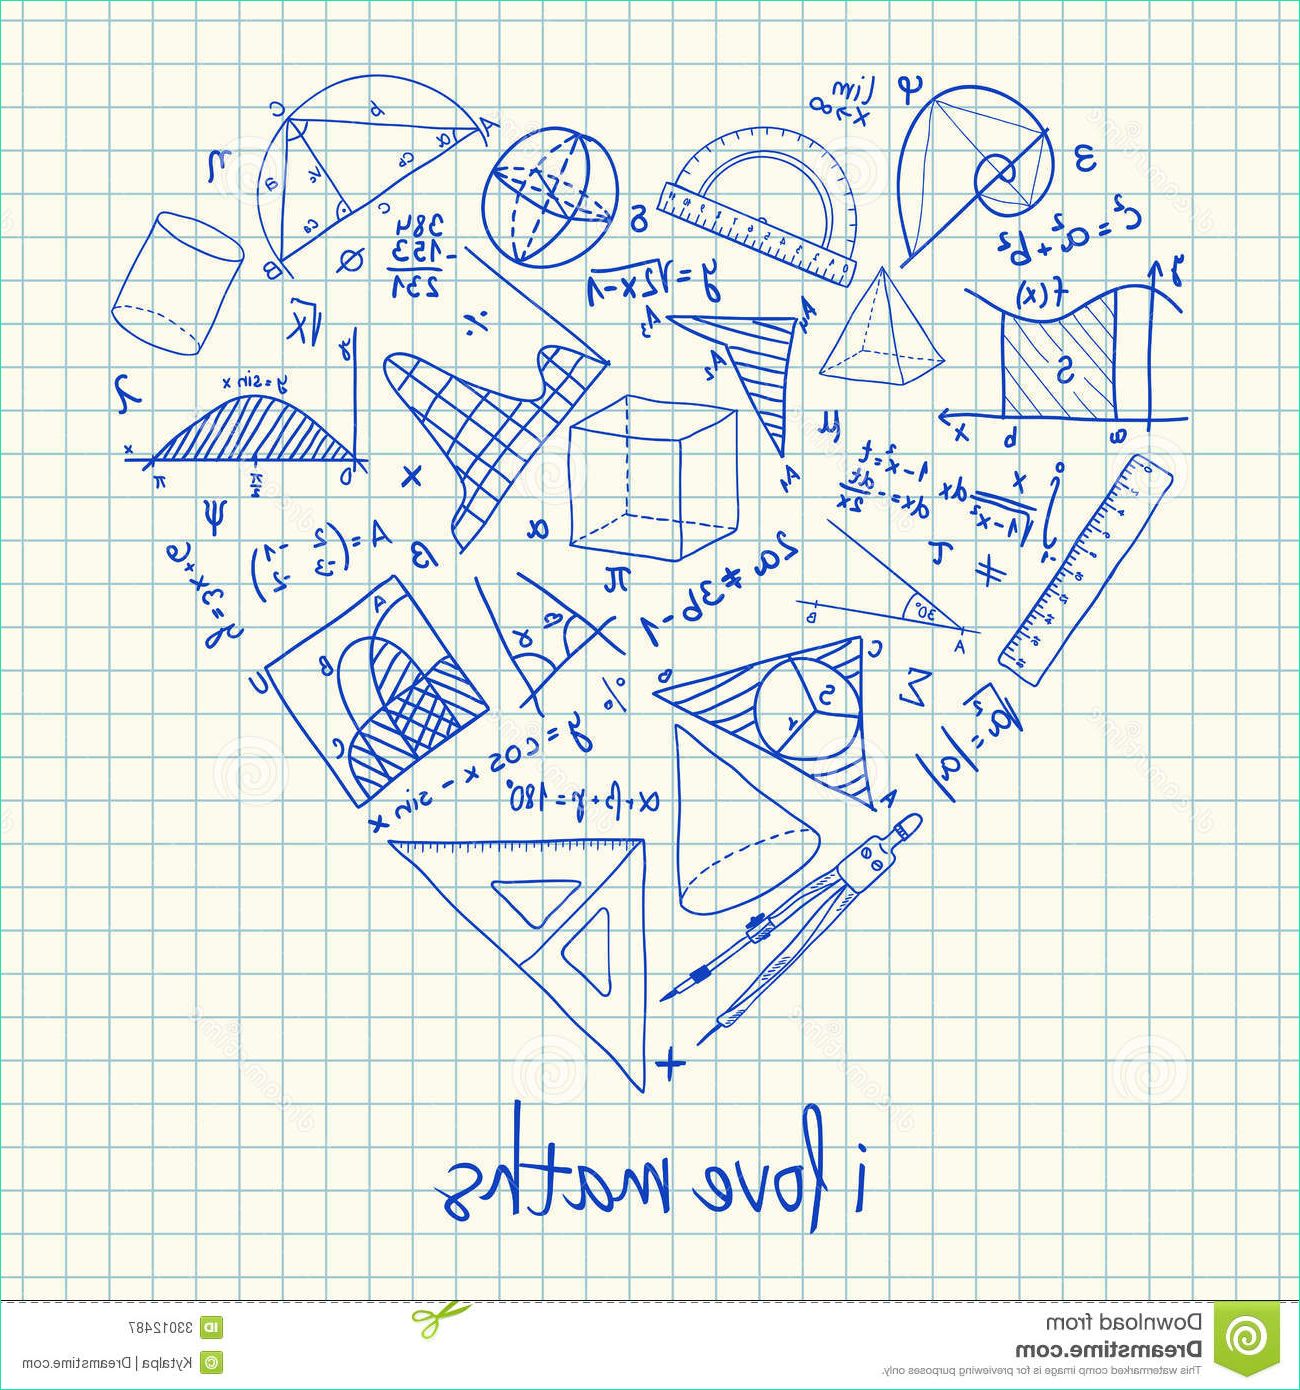 royalty free stock photography maths drawings heart shape illustration doodles image